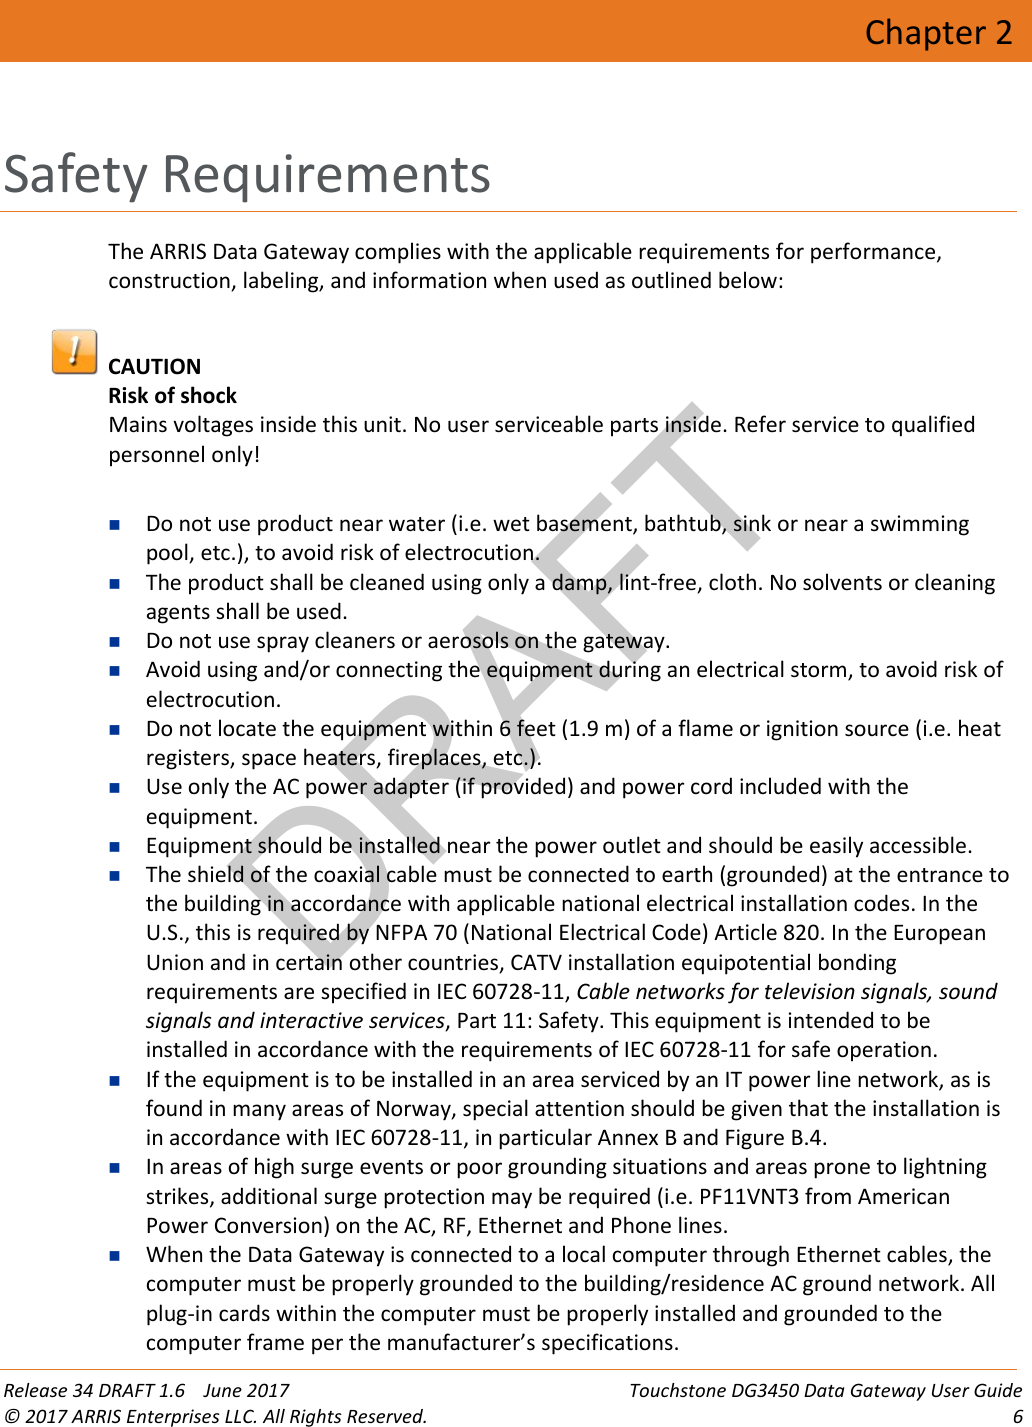 DRAFT Release 34 DRAFT 1.6    June 2017 Touchstone DG3450 Data Gateway User Guide © 2017 ARRIS Enterprises LLC. All Rights Reserved.  6  Chapter 2 Safety Requirements The ARRIS Data Gateway complies with the applicable requirements for performance, construction, labeling, and information when used as outlined below:   CAUTION Risk of shock Mains voltages inside this unit. No user serviceable parts inside. Refer service to qualified personnel only!   Do not use product near water (i.e. wet basement, bathtub, sink or near a swimming pool, etc.), to avoid risk of electrocution.  The product shall be cleaned using only a damp, lint-free, cloth. No solvents or cleaning agents shall be used.  Do not use spray cleaners or aerosols on the gateway.  Avoid using and/or connecting the equipment during an electrical storm, to avoid risk of electrocution.  Do not locate the equipment within 6 feet (1.9 m) of a flame or ignition source (i.e. heat registers, space heaters, fireplaces, etc.).  Use only the AC power adapter (if provided) and power cord included with the equipment.  Equipment should be installed near the power outlet and should be easily accessible.  The shield of the coaxial cable must be connected to earth (grounded) at the entrance to the building in accordance with applicable national electrical installation codes. In the U.S., this is required by NFPA 70 (National Electrical Code) Article 820. In the European Union and in certain other countries, CATV installation equipotential bonding requirements are specified in IEC 60728-11, Cable networks for television signals, sound signals and interactive services, Part 11: Safety. This equipment is intended to be installed in accordance with the requirements of IEC 60728-11 for safe operation.  If the equipment is to be installed in an area serviced by an IT power line network, as is found in many areas of Norway, special attention should be given that the installation is in accordance with IEC 60728-11, in particular Annex B and Figure B.4.  In areas of high surge events or poor grounding situations and areas prone to lightning strikes, additional surge protection may be required (i.e. PF11VNT3 from American Power Conversion) on the AC, RF, Ethernet and Phone lines.  When the Data Gateway is connected to a local computer through Ethernet cables, the computer must be properly grounded to the building/residence AC ground network. All plug-in cards within the computer must be properly installed and grounded to the computer frame per the manufacturer’s specifications. 